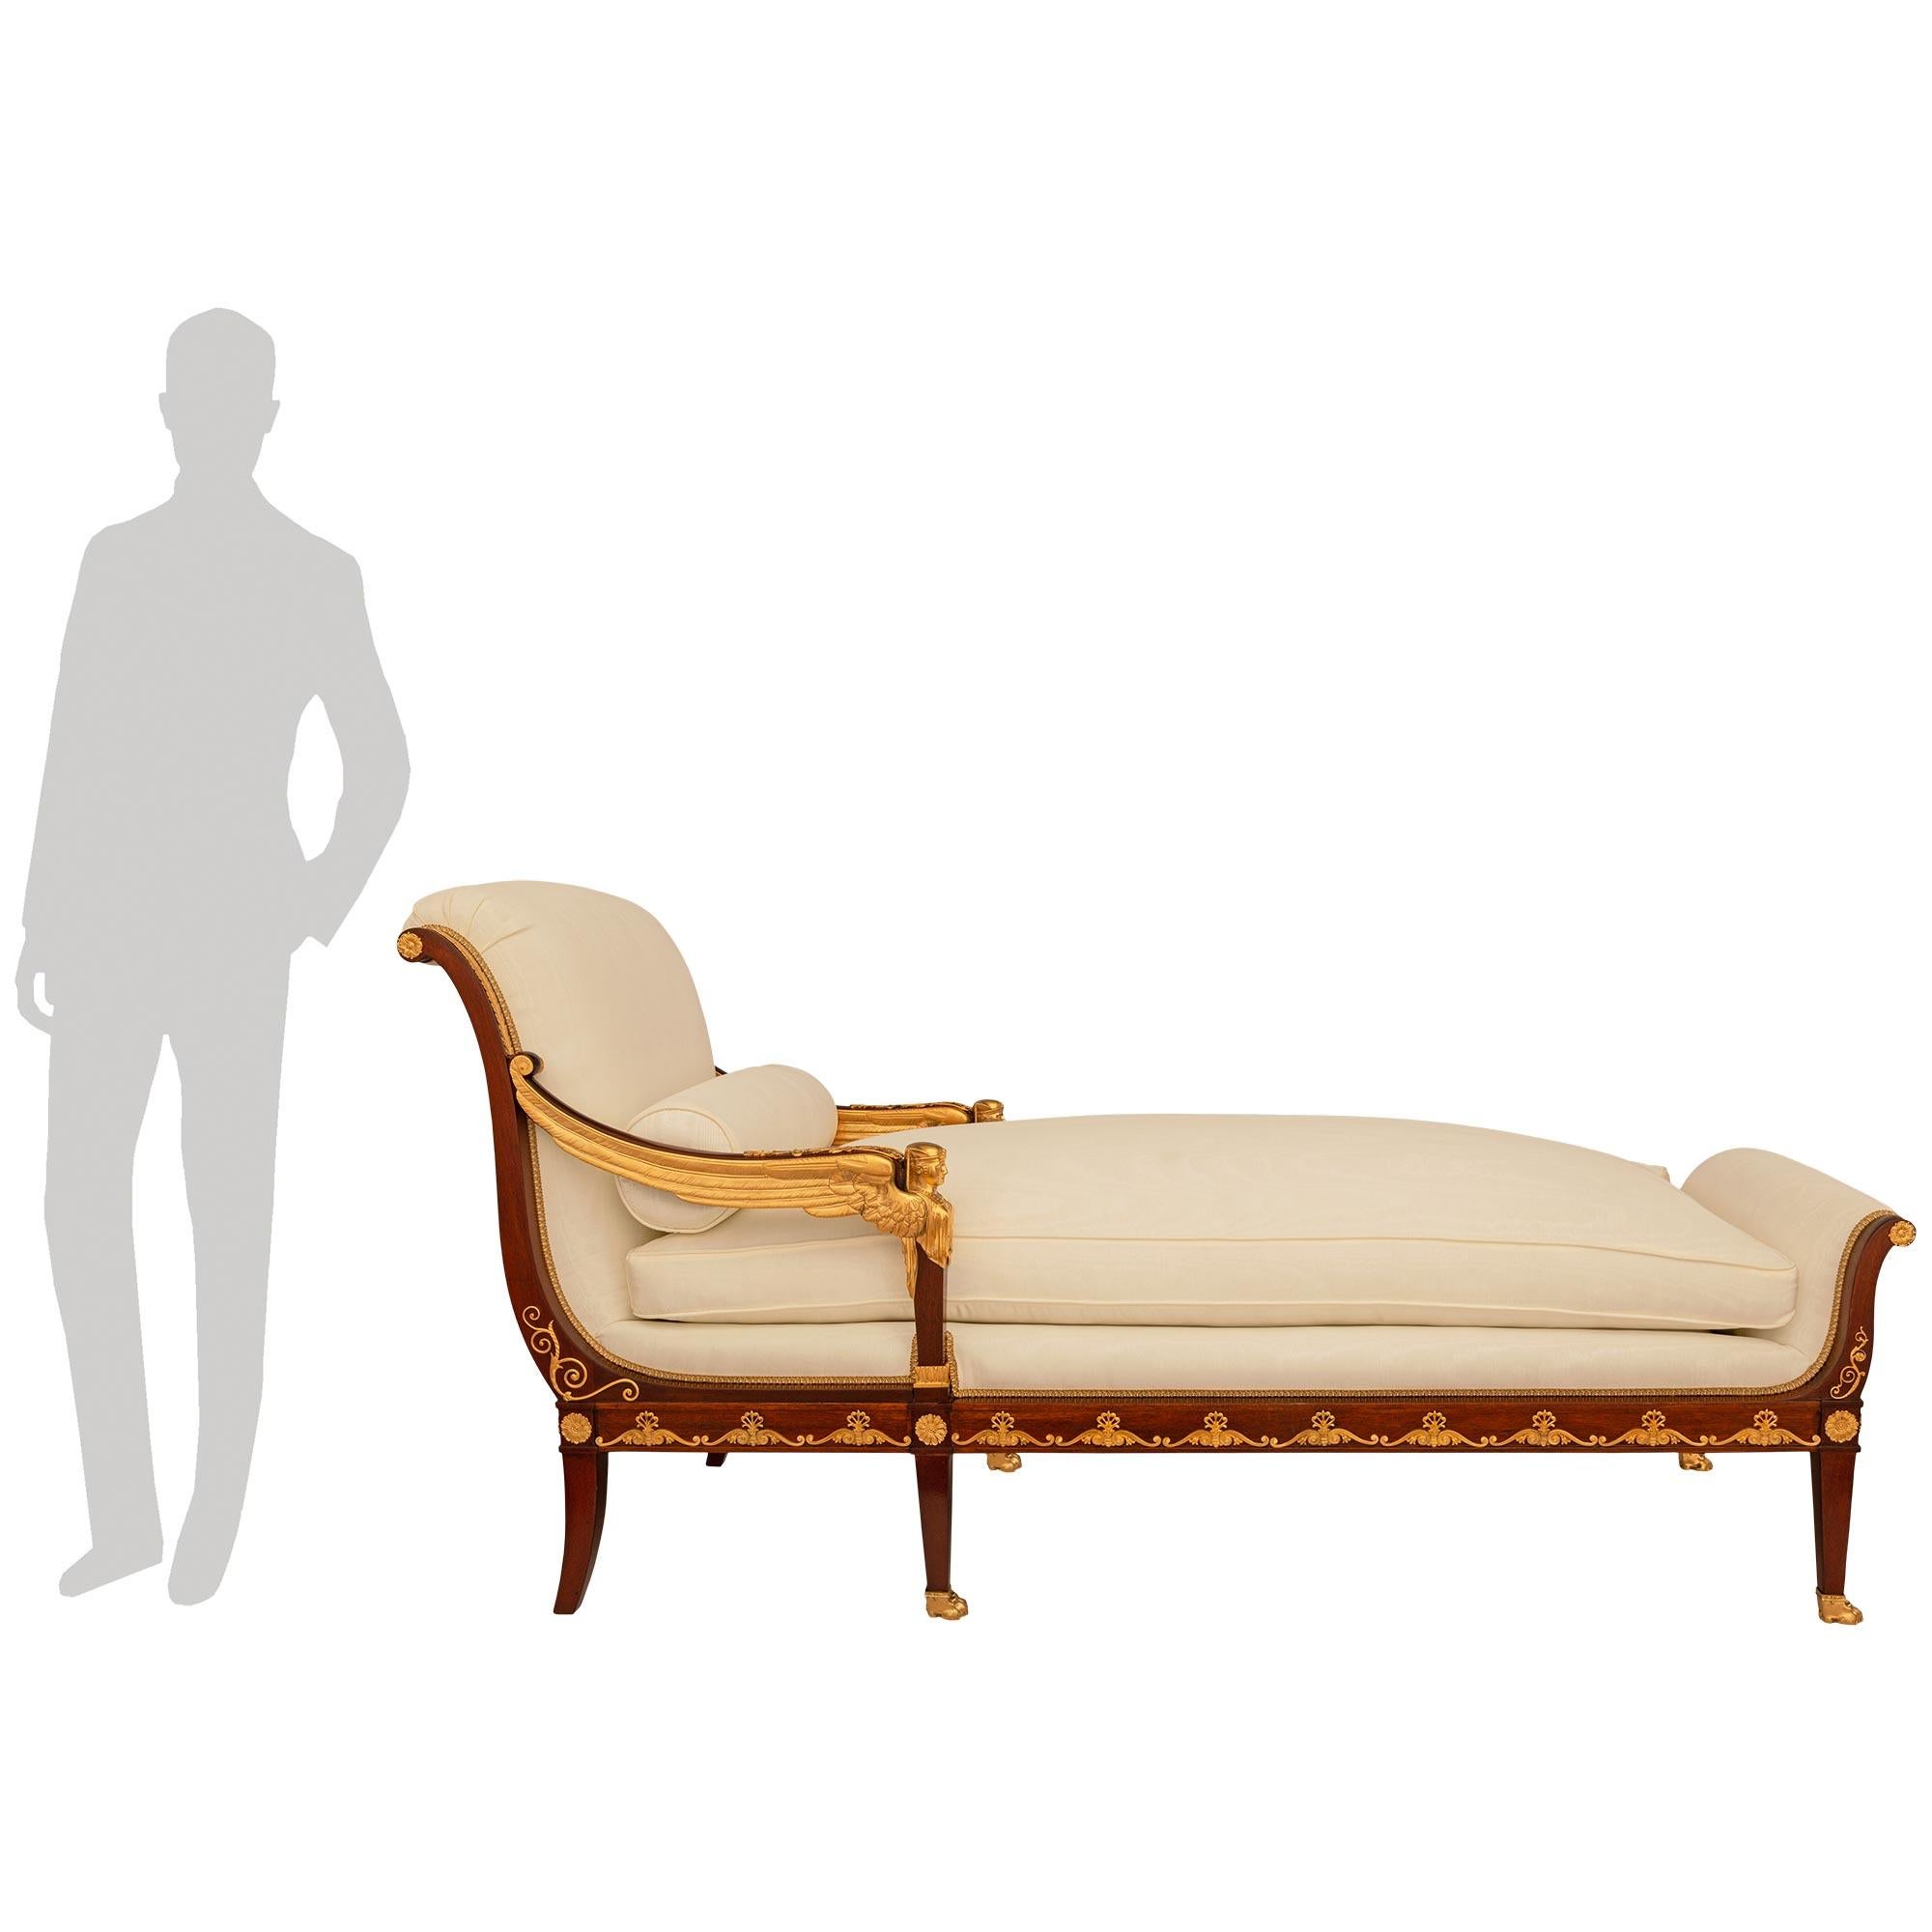 An elegant and most decorative French early 19th century Empire period Mahogany and Ormolu chaise, Circa 1805. This exquisite chaise is raised by six elegant Mahogany legs  with Ormolu paw feet supporting the front and central legs with curved